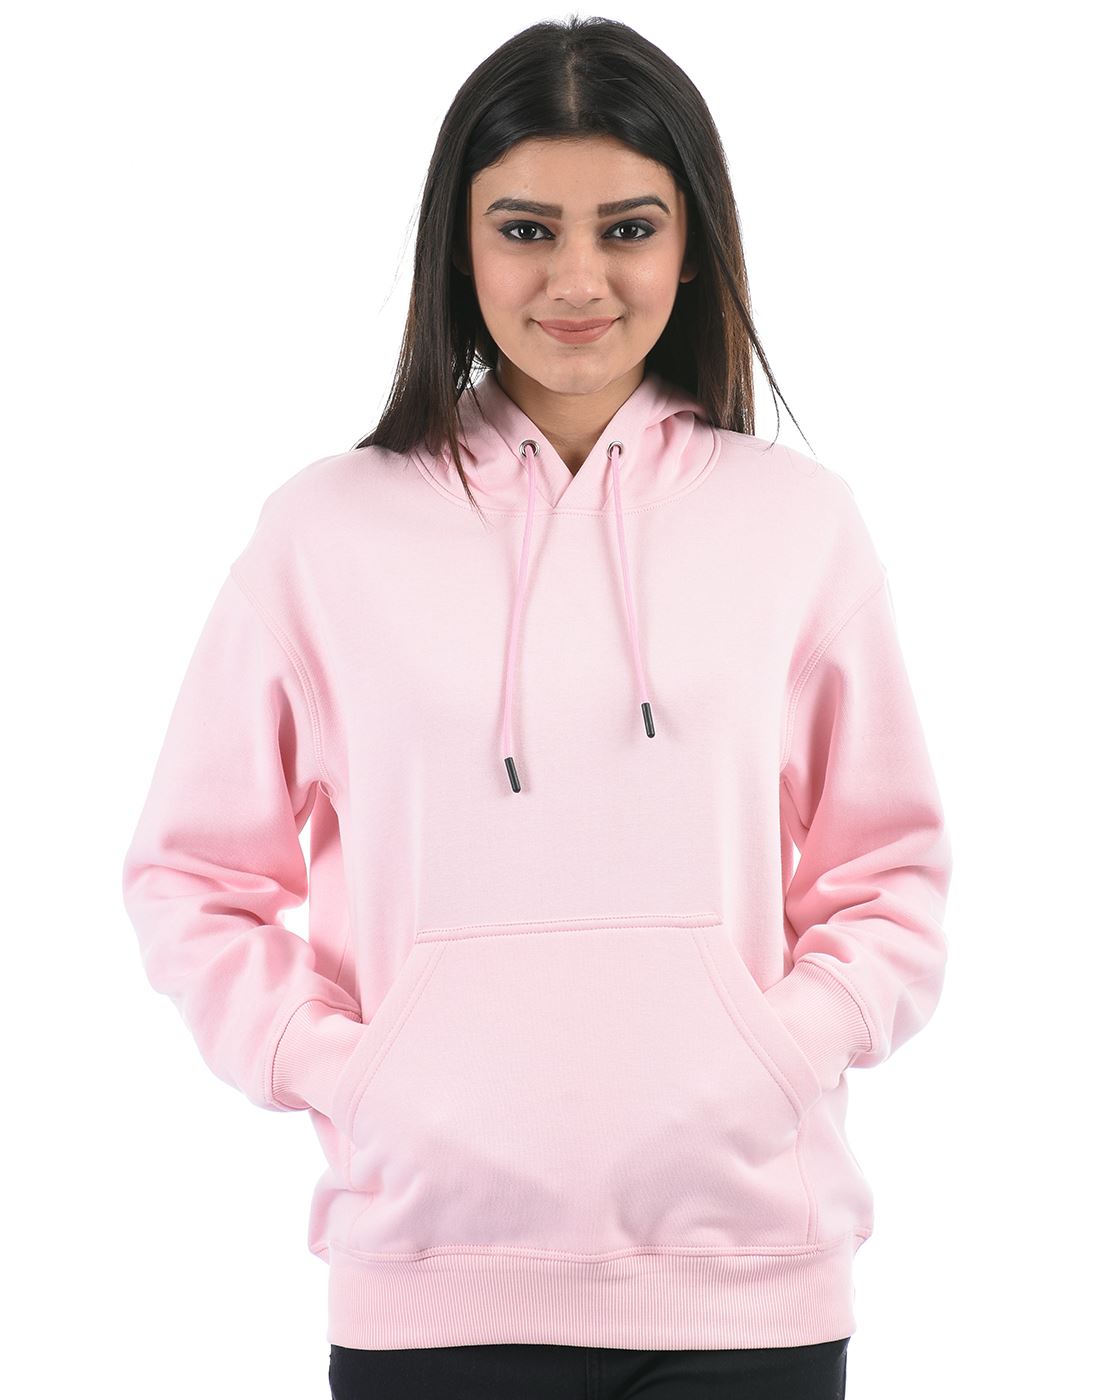 Oneway Women Pink Solid Hooded Sweat Shirt